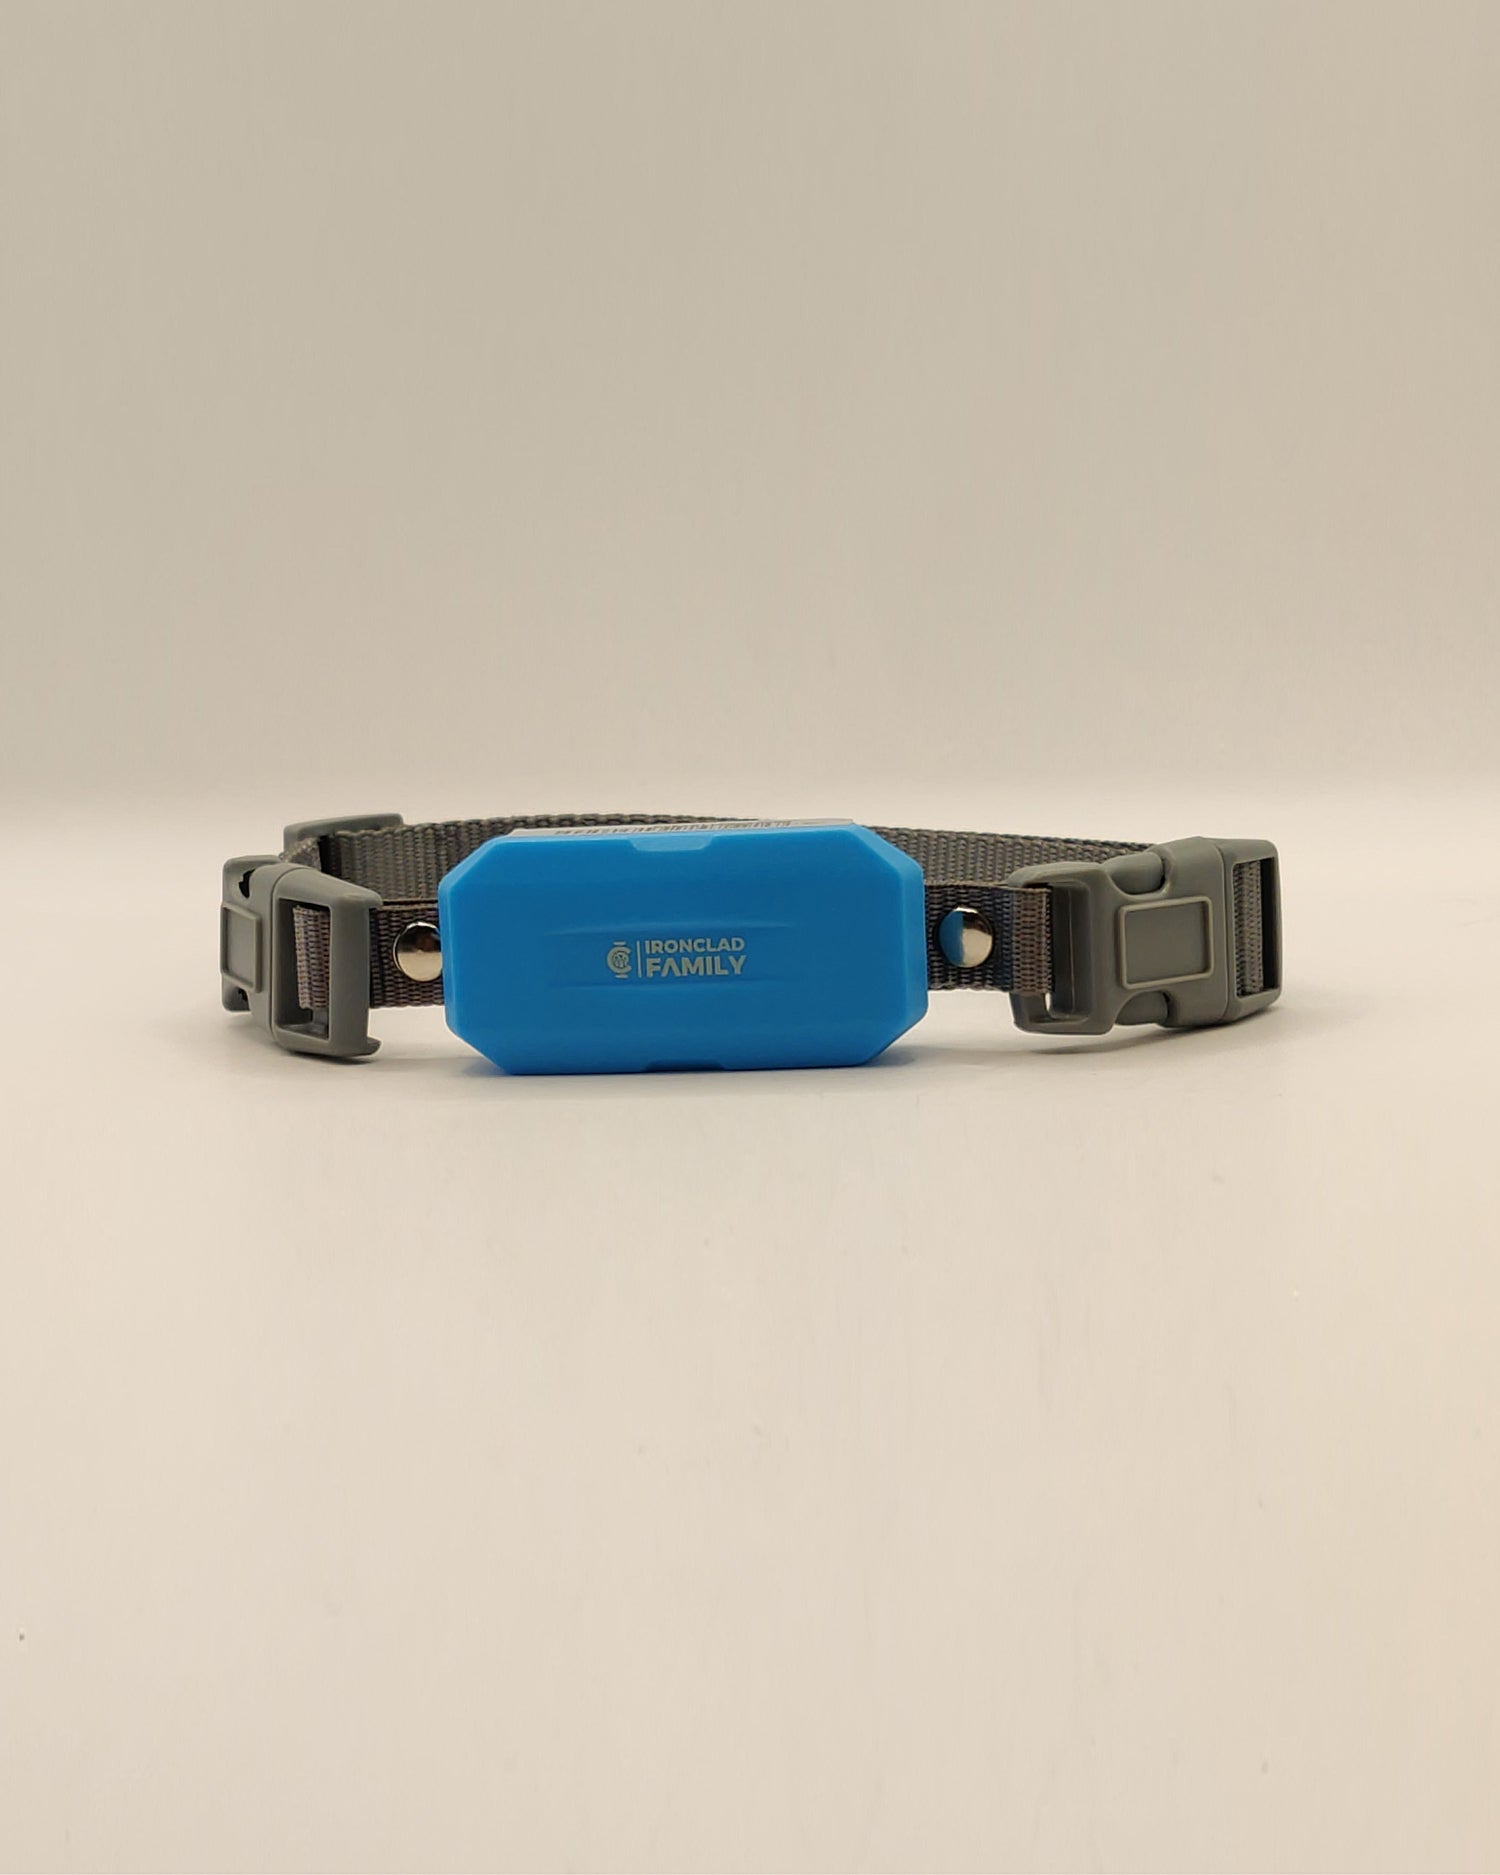 GPS tracker for pets, specifically designed for dogs, featuring an app and sim card, displayed on a blue and gray collar with a small button